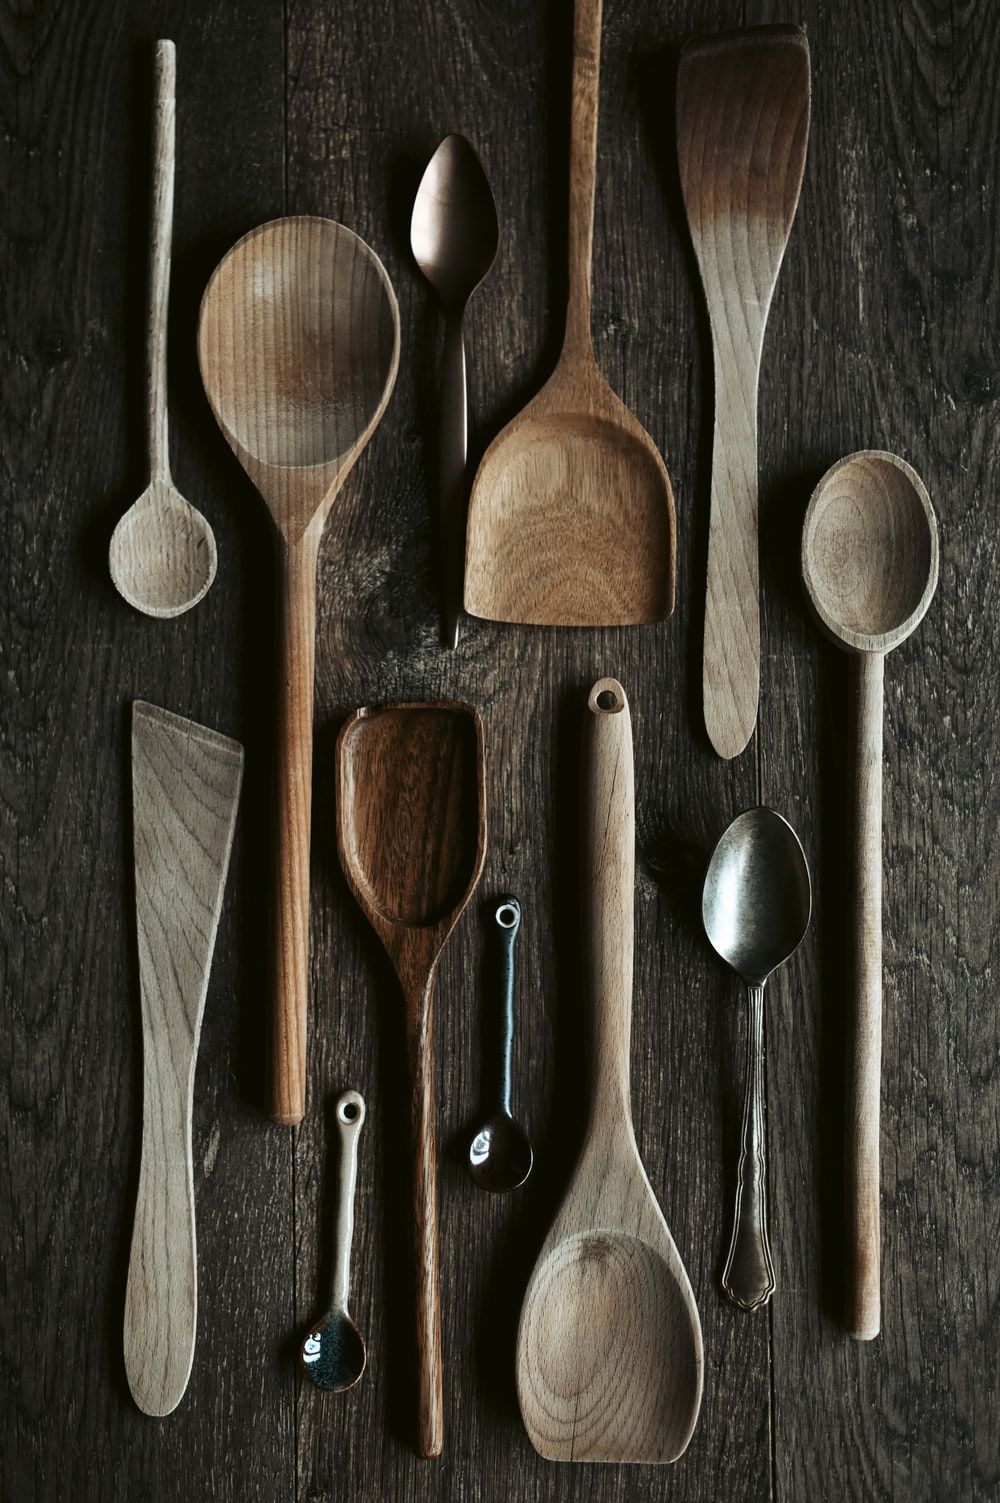 Wooden Spoon Picture. Download Free Image